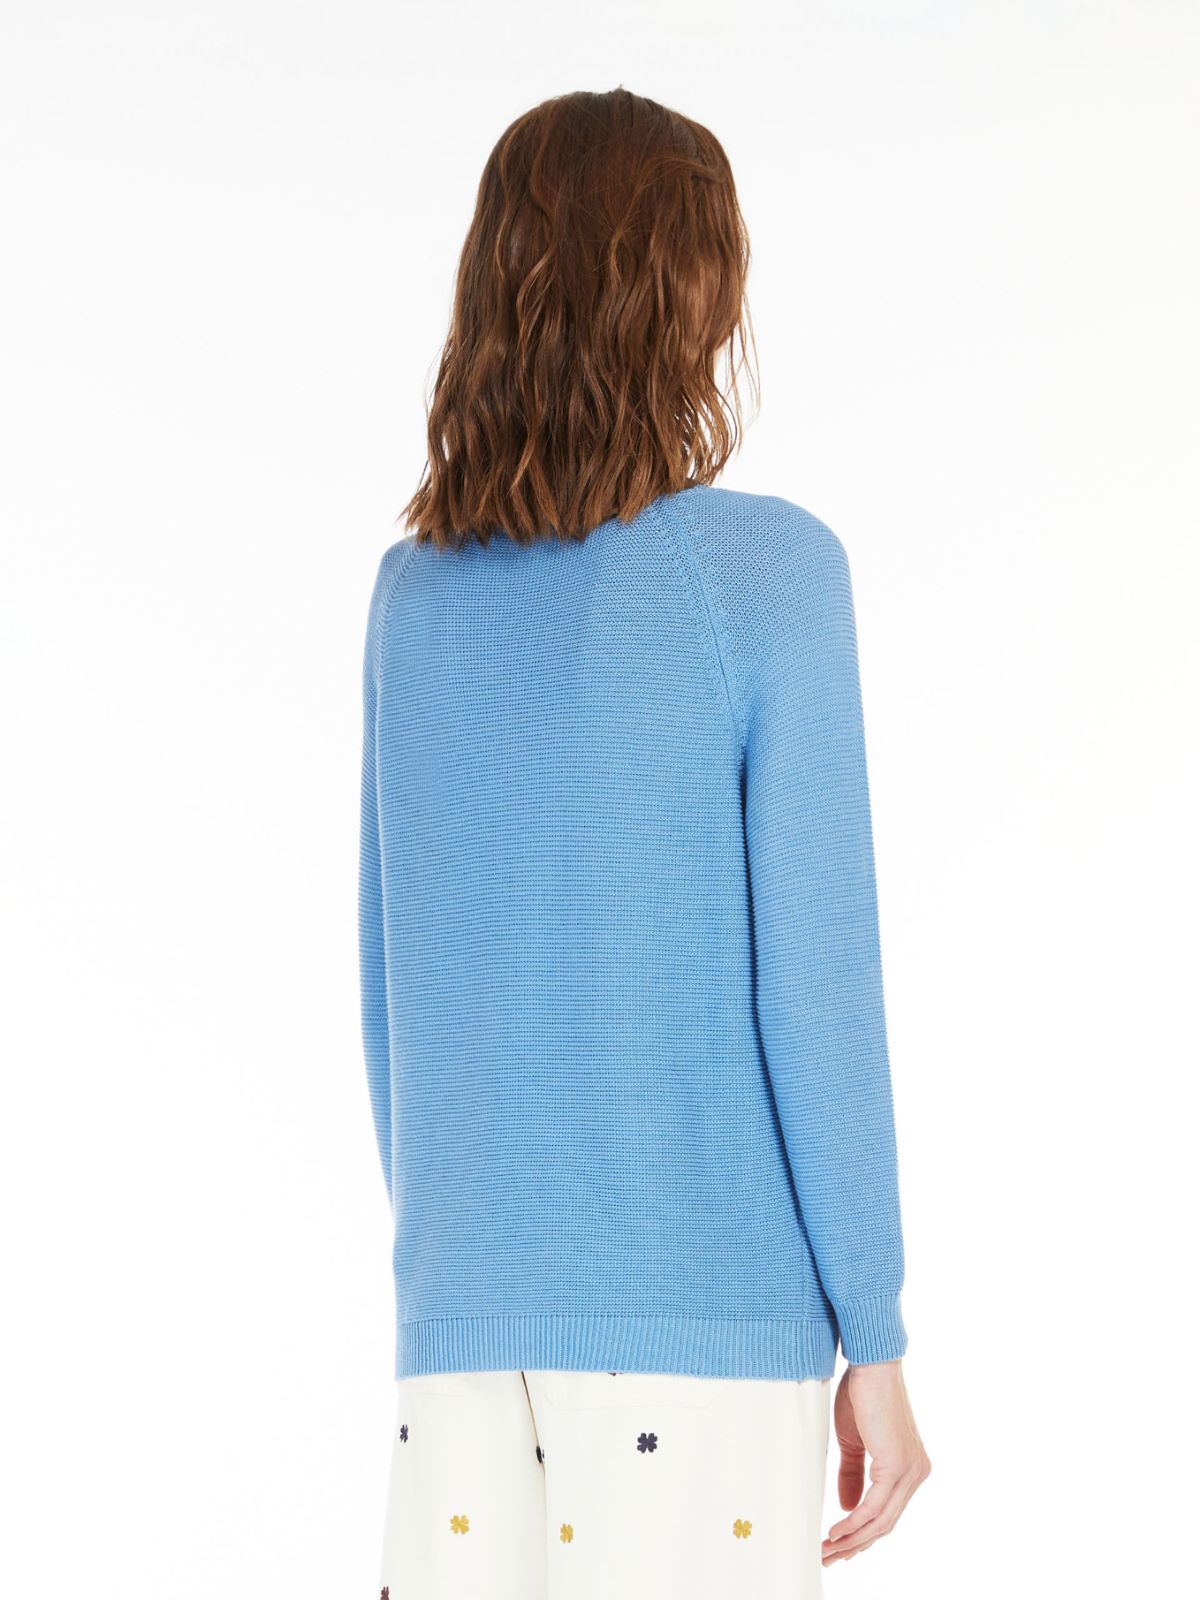 Relaxed-fit cotton sweater - SKY BLUE - Weekend Max Mara - 3